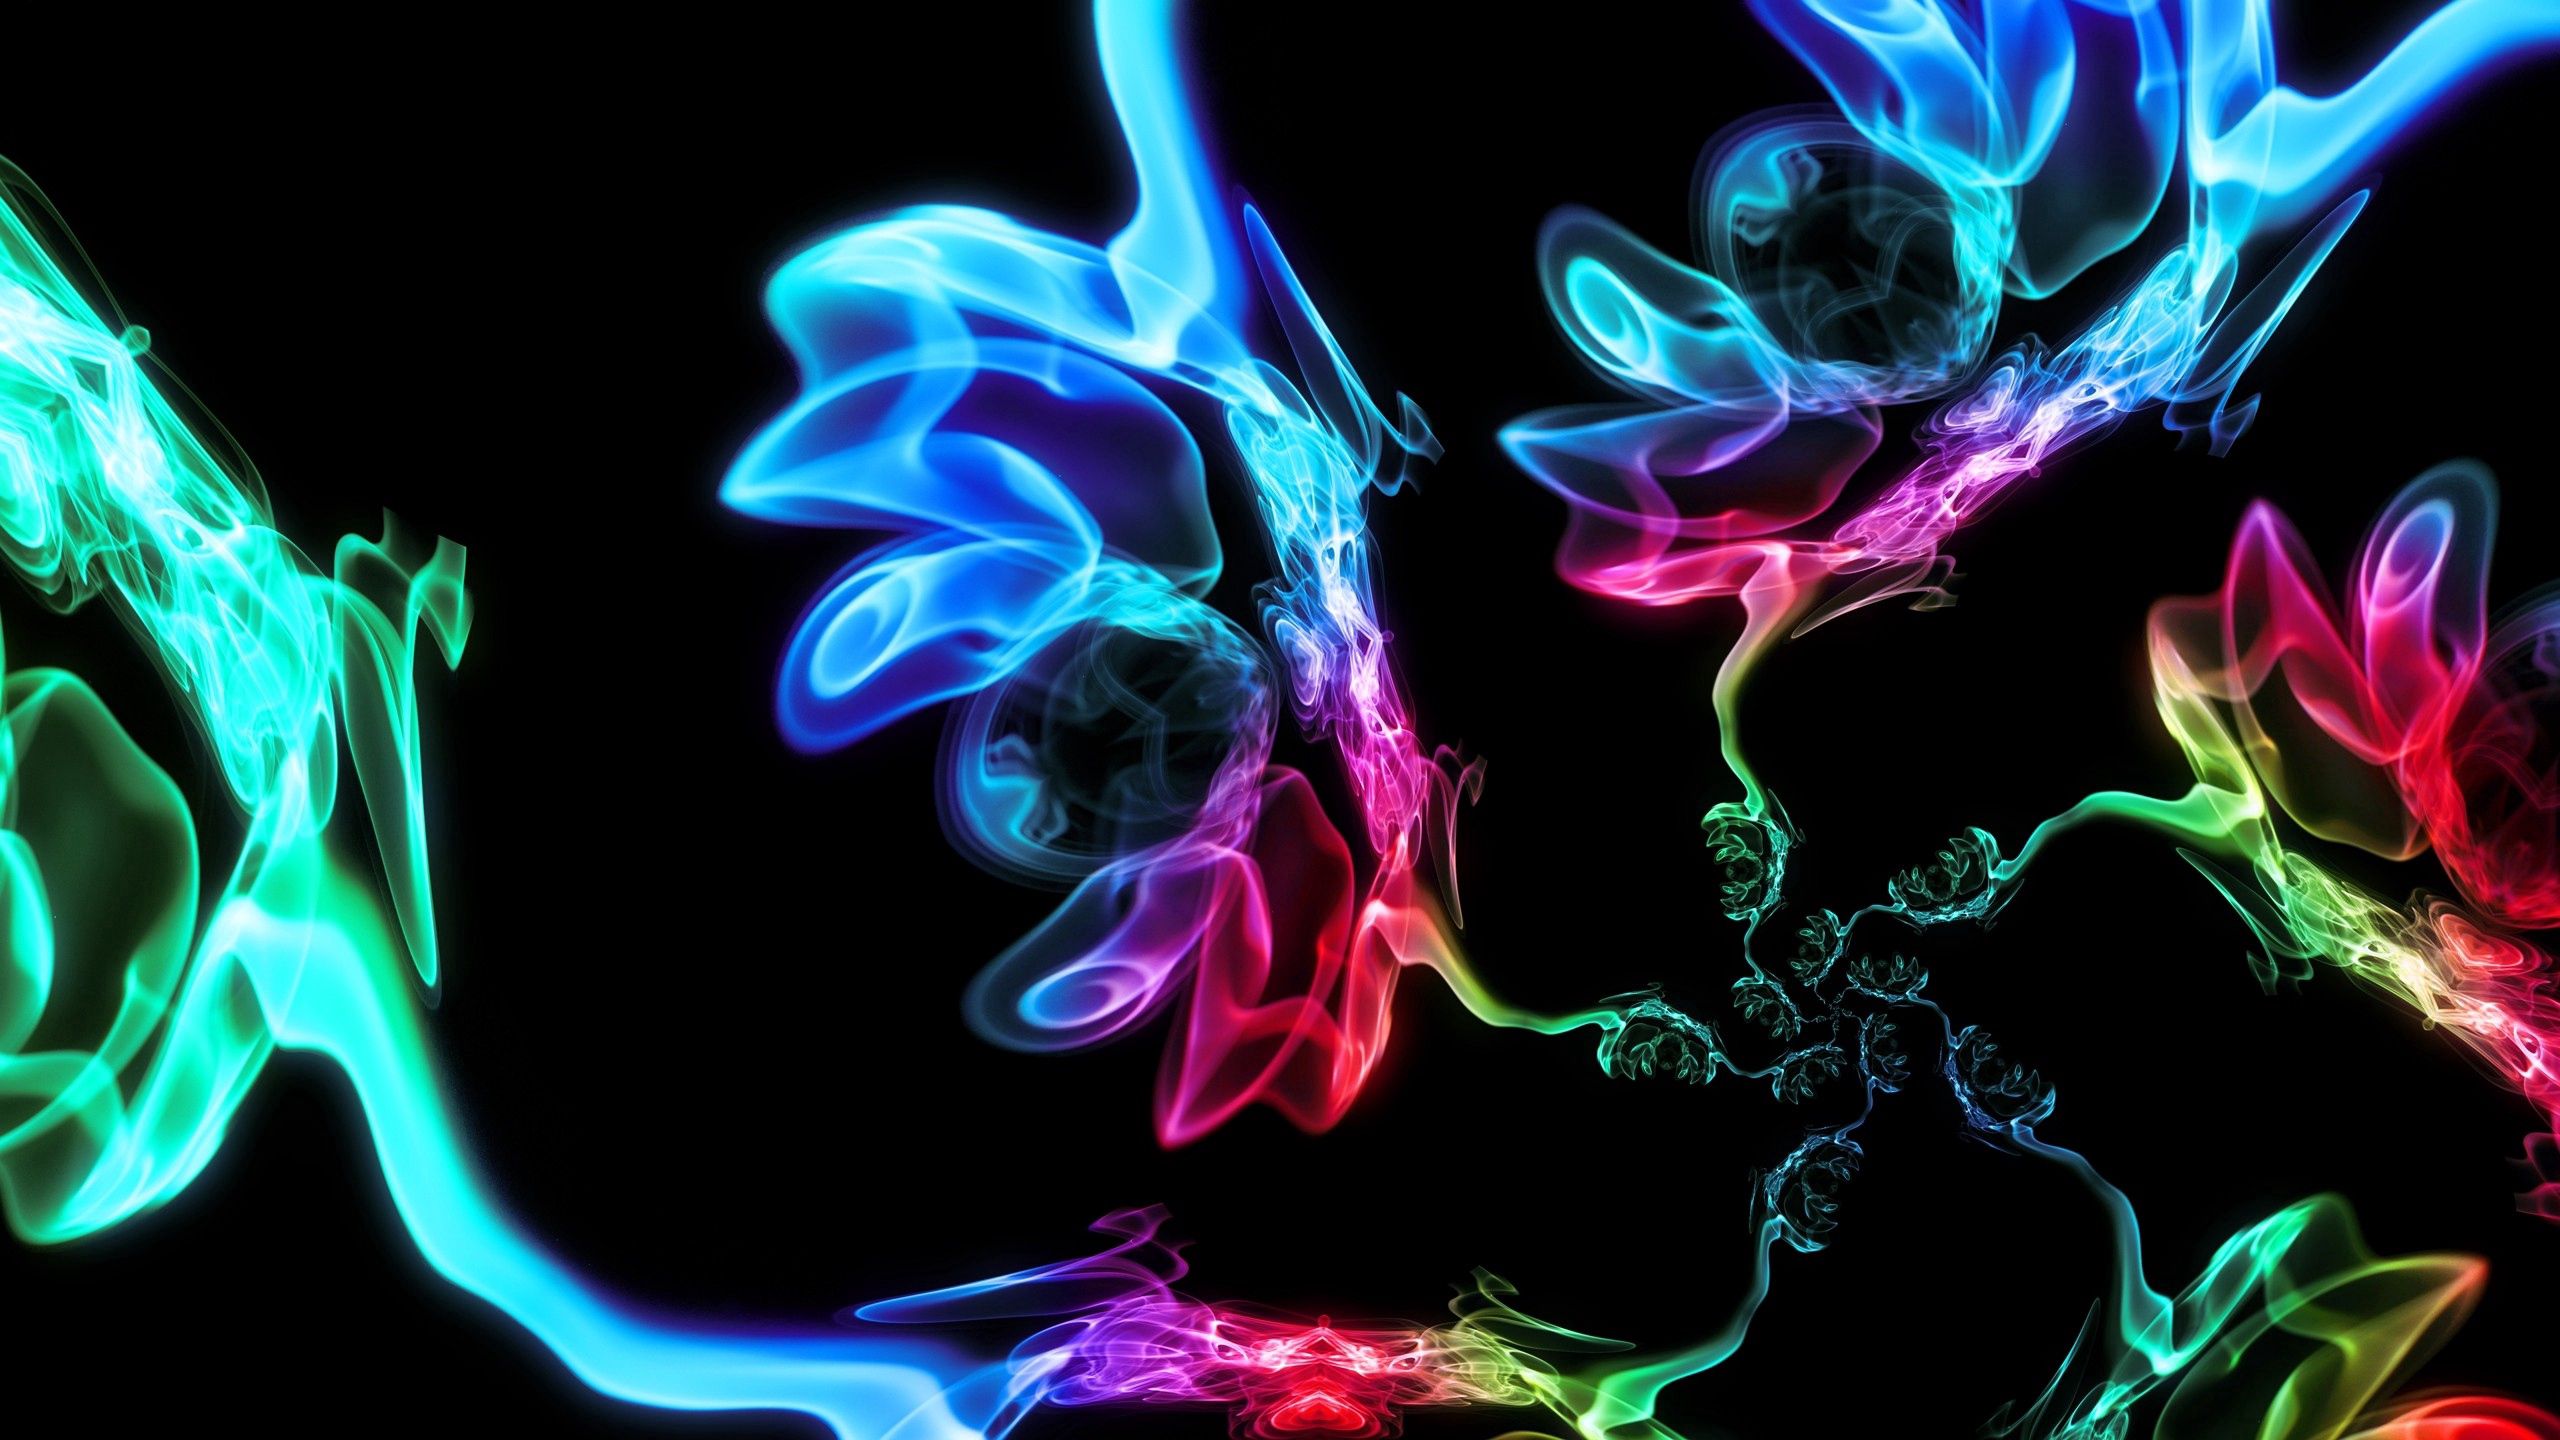 motley, forms, abstract, smoke, multicolored, dark background, form High Definition image